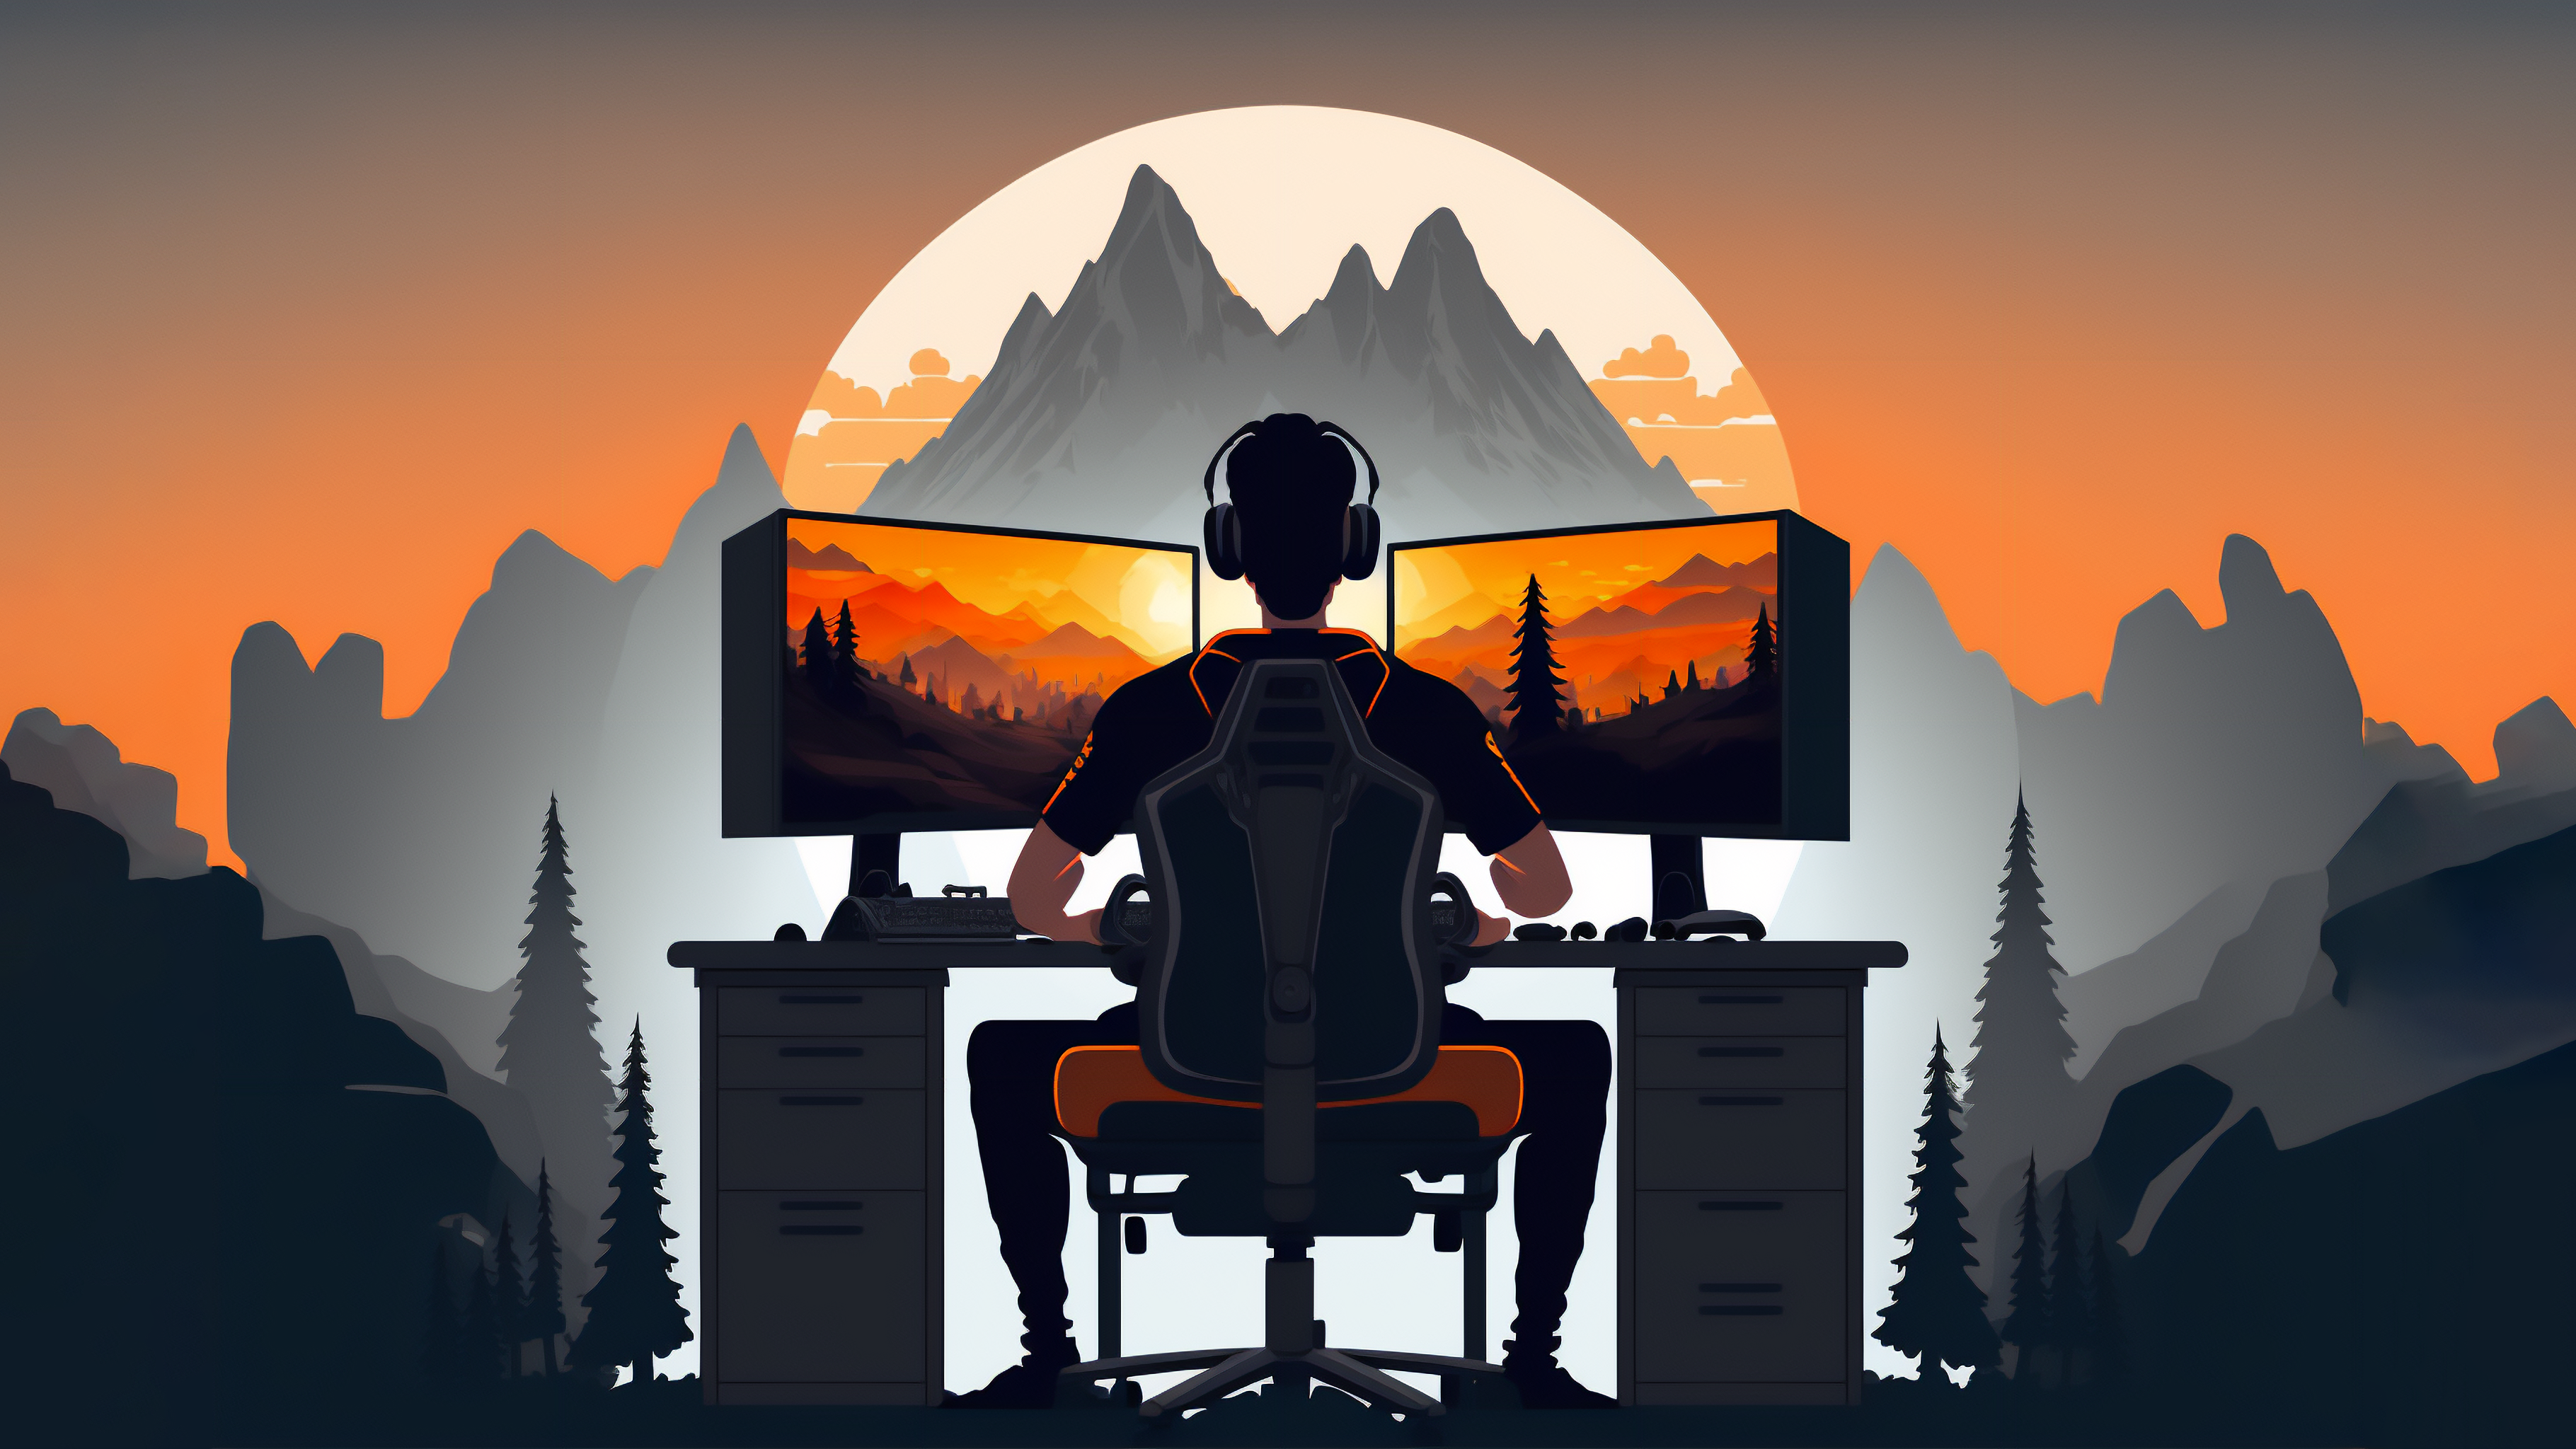 gamer, computer, PC gaming, simple background